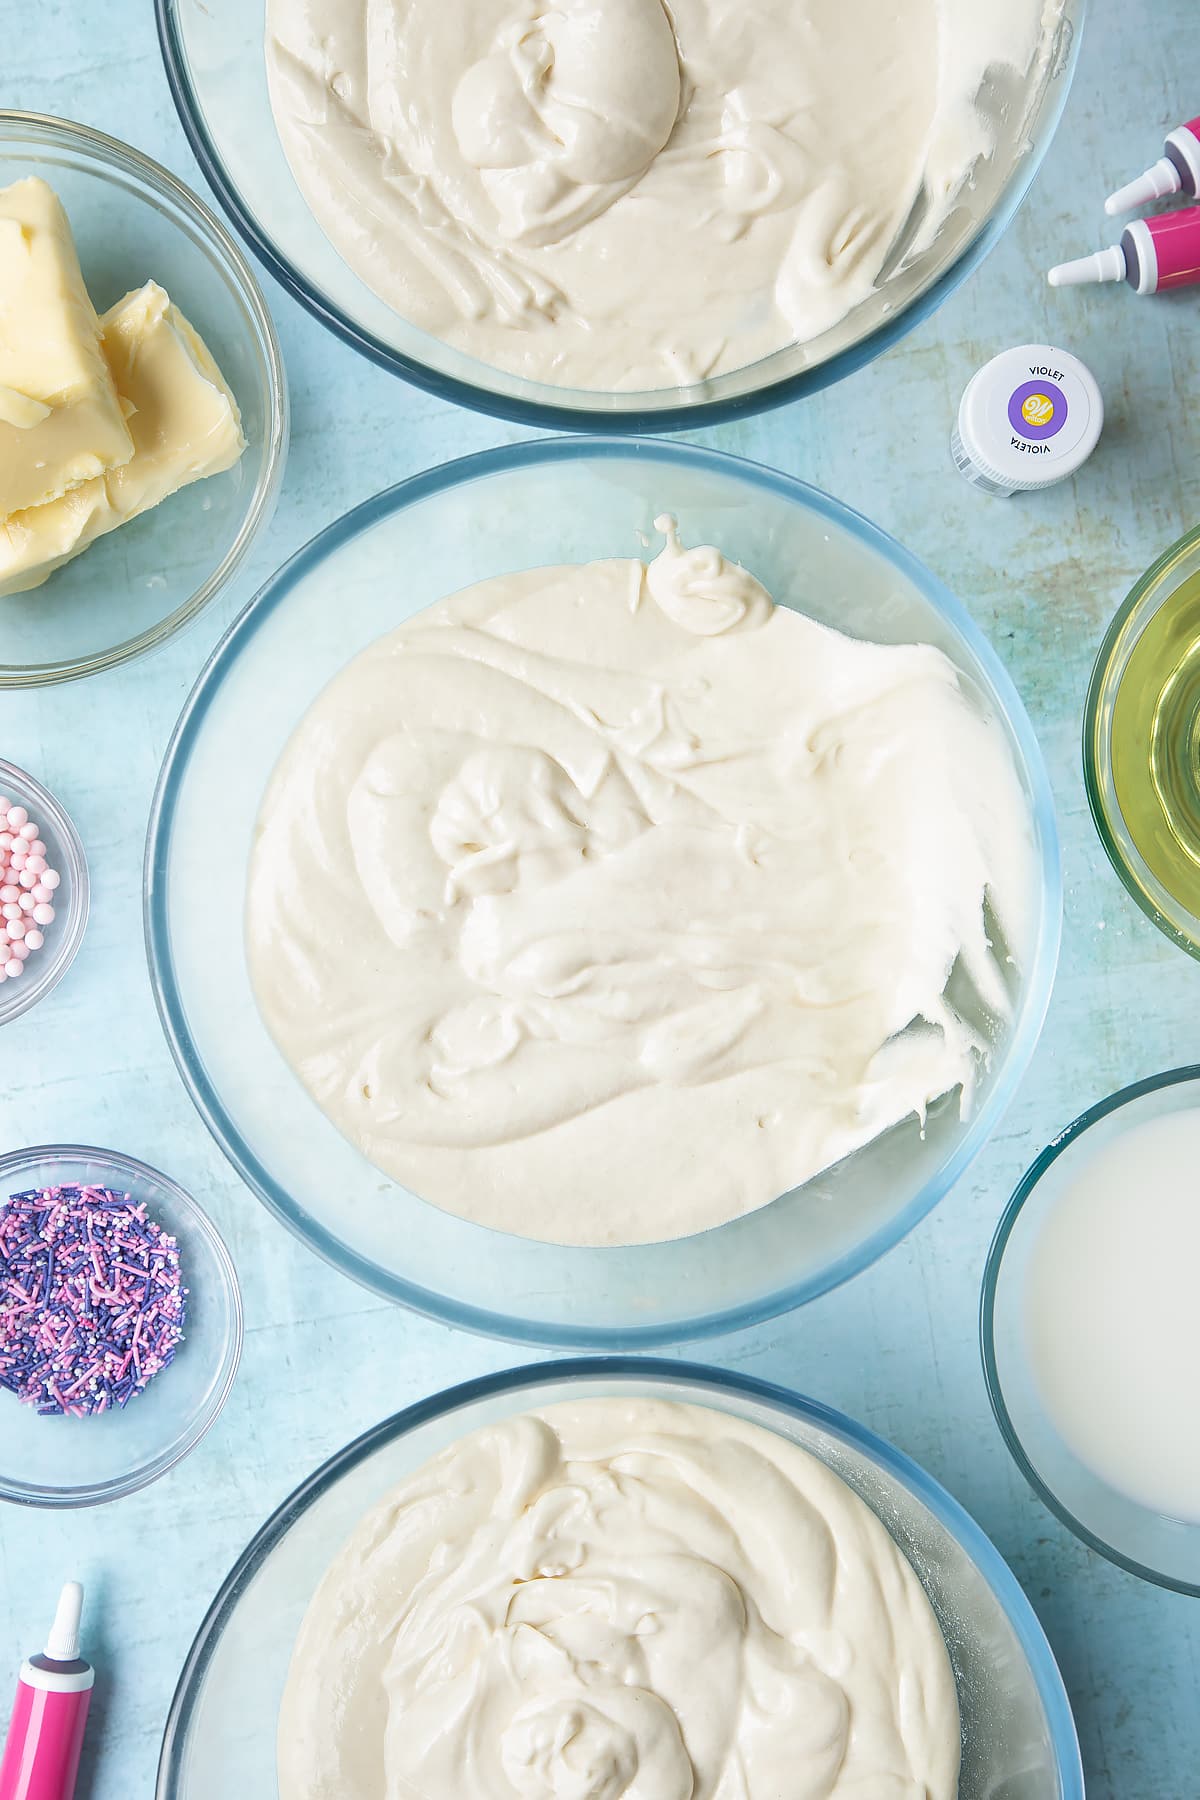 Pale cake batter divided into three mixing bowls. Ingredients to make pink ombre cake surround the bowls.